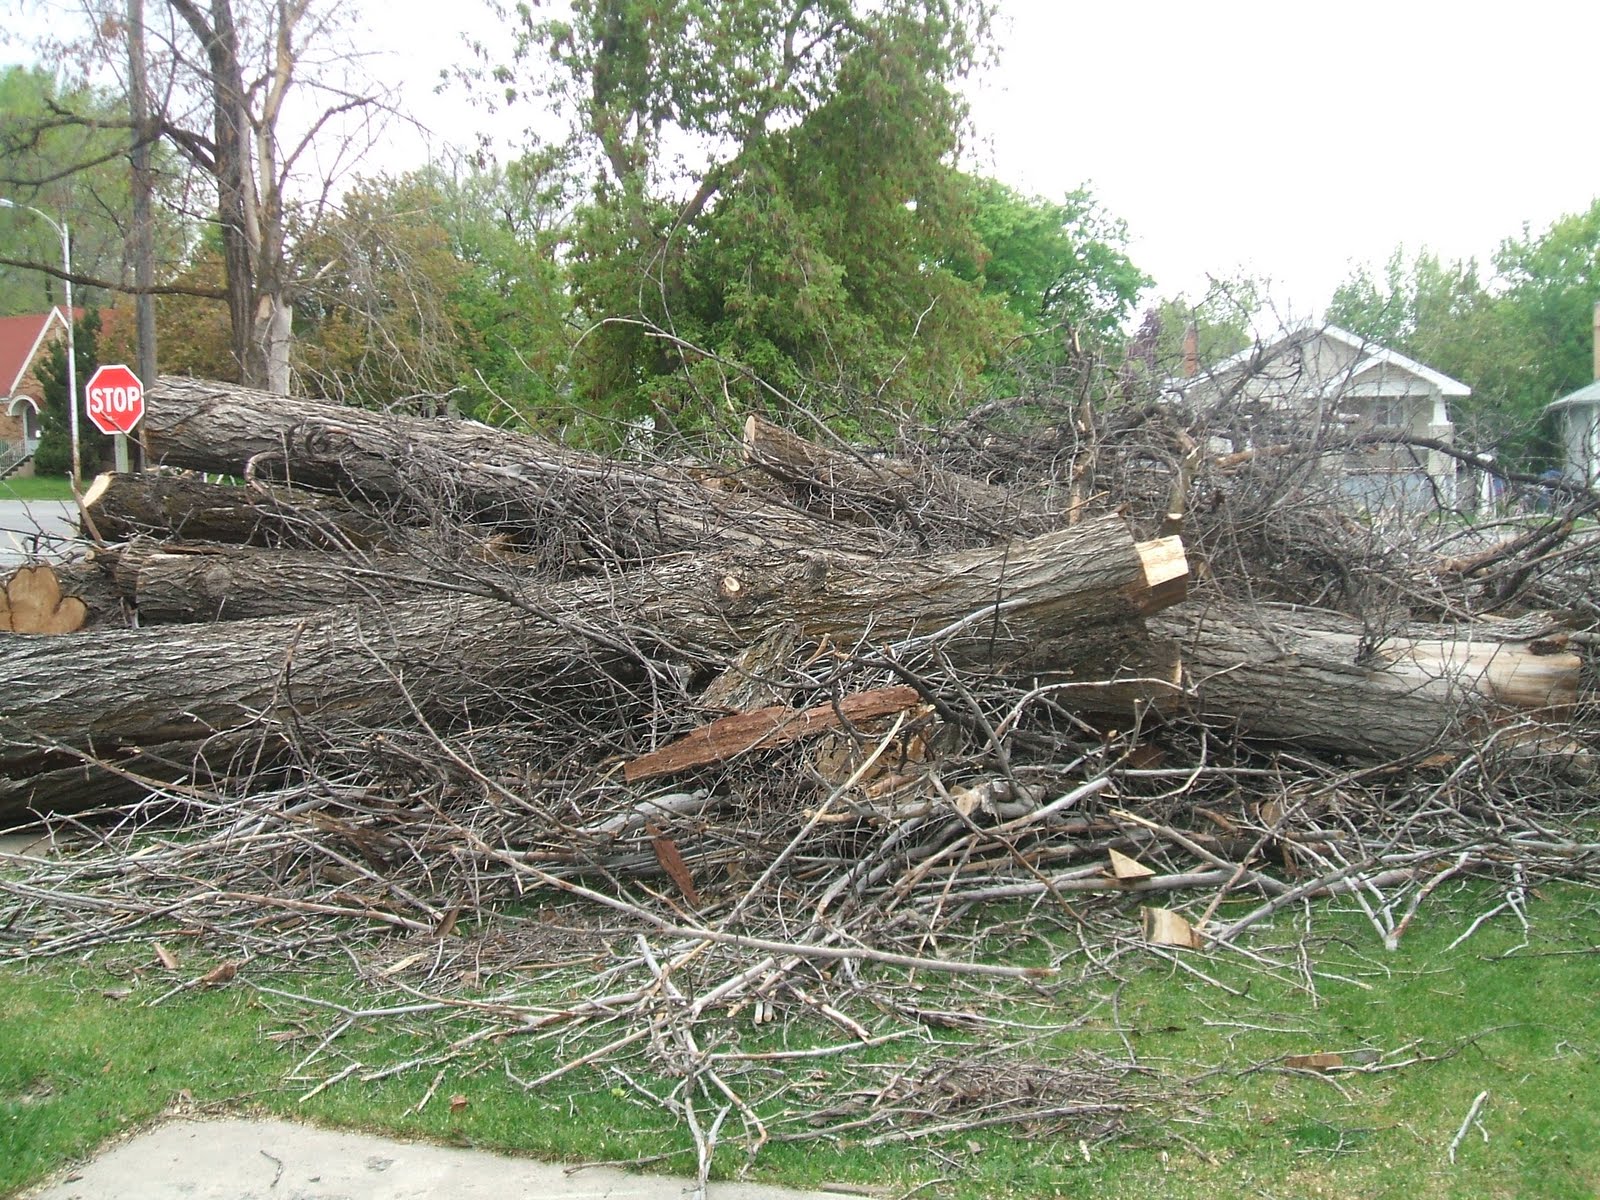 The Nash News: Cutting Down the Old Trees